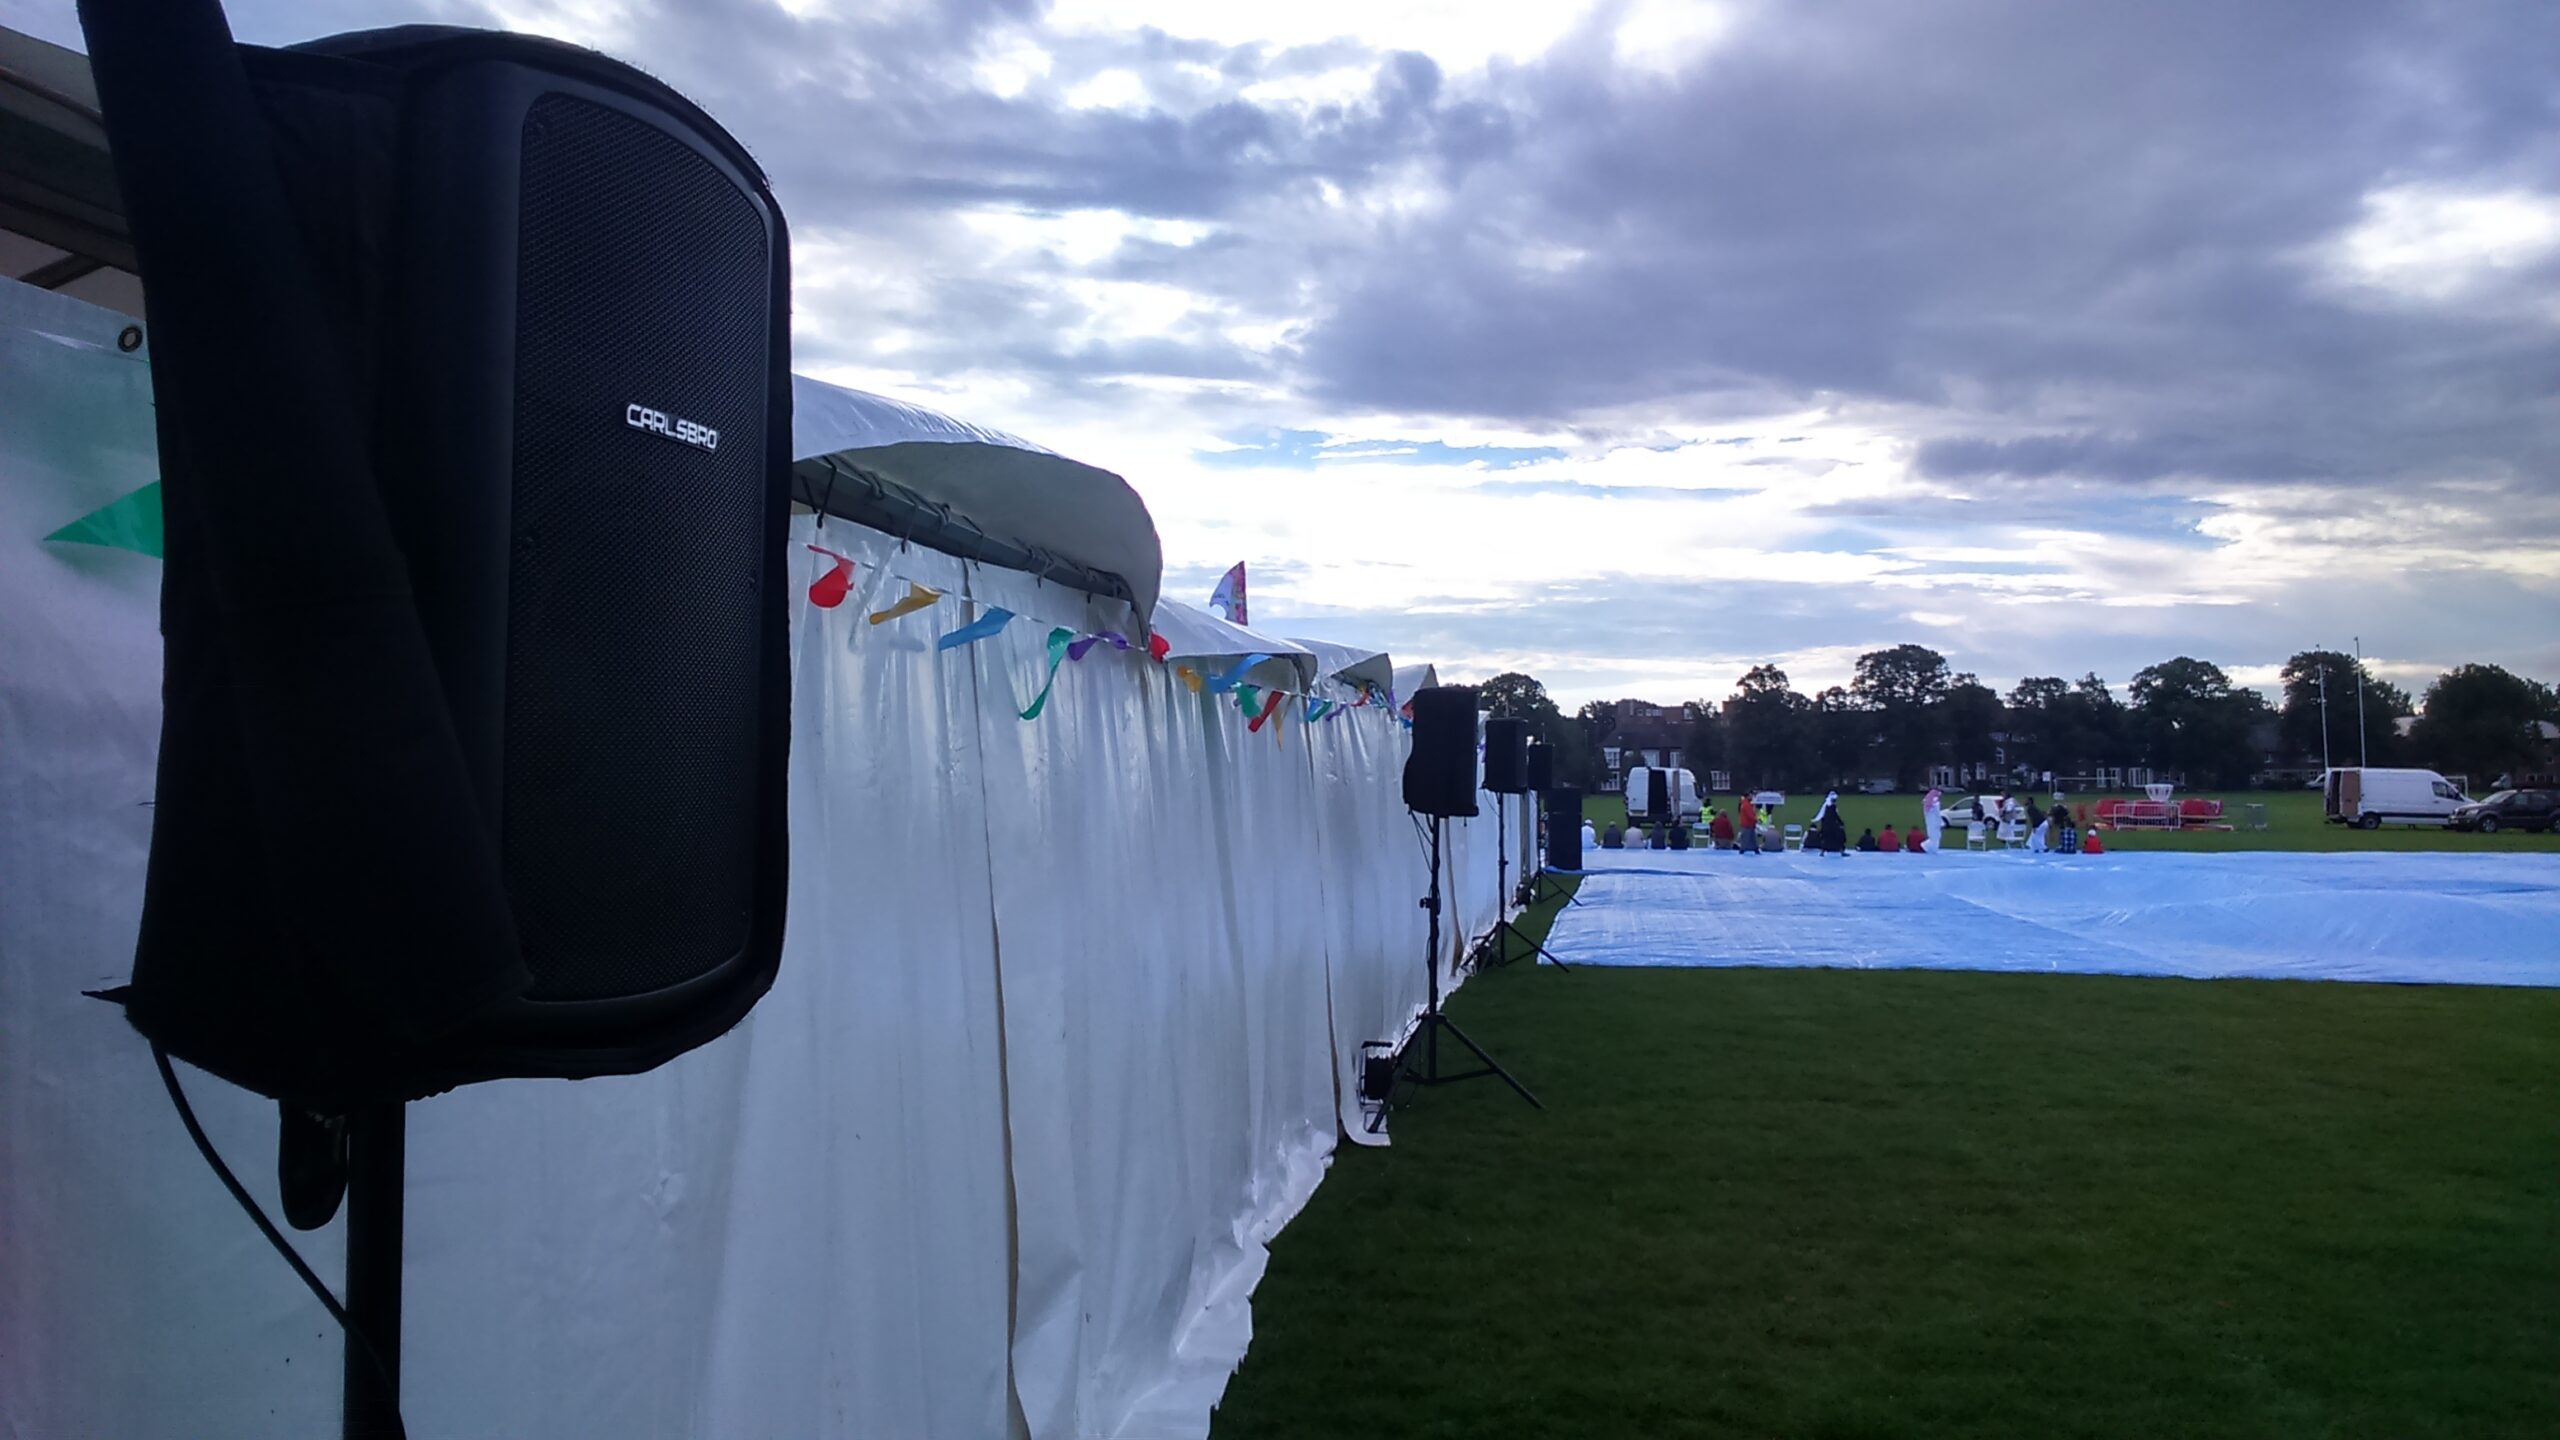 EES Showhire provide bespoke outdoor PA hire solutions for events and marquees